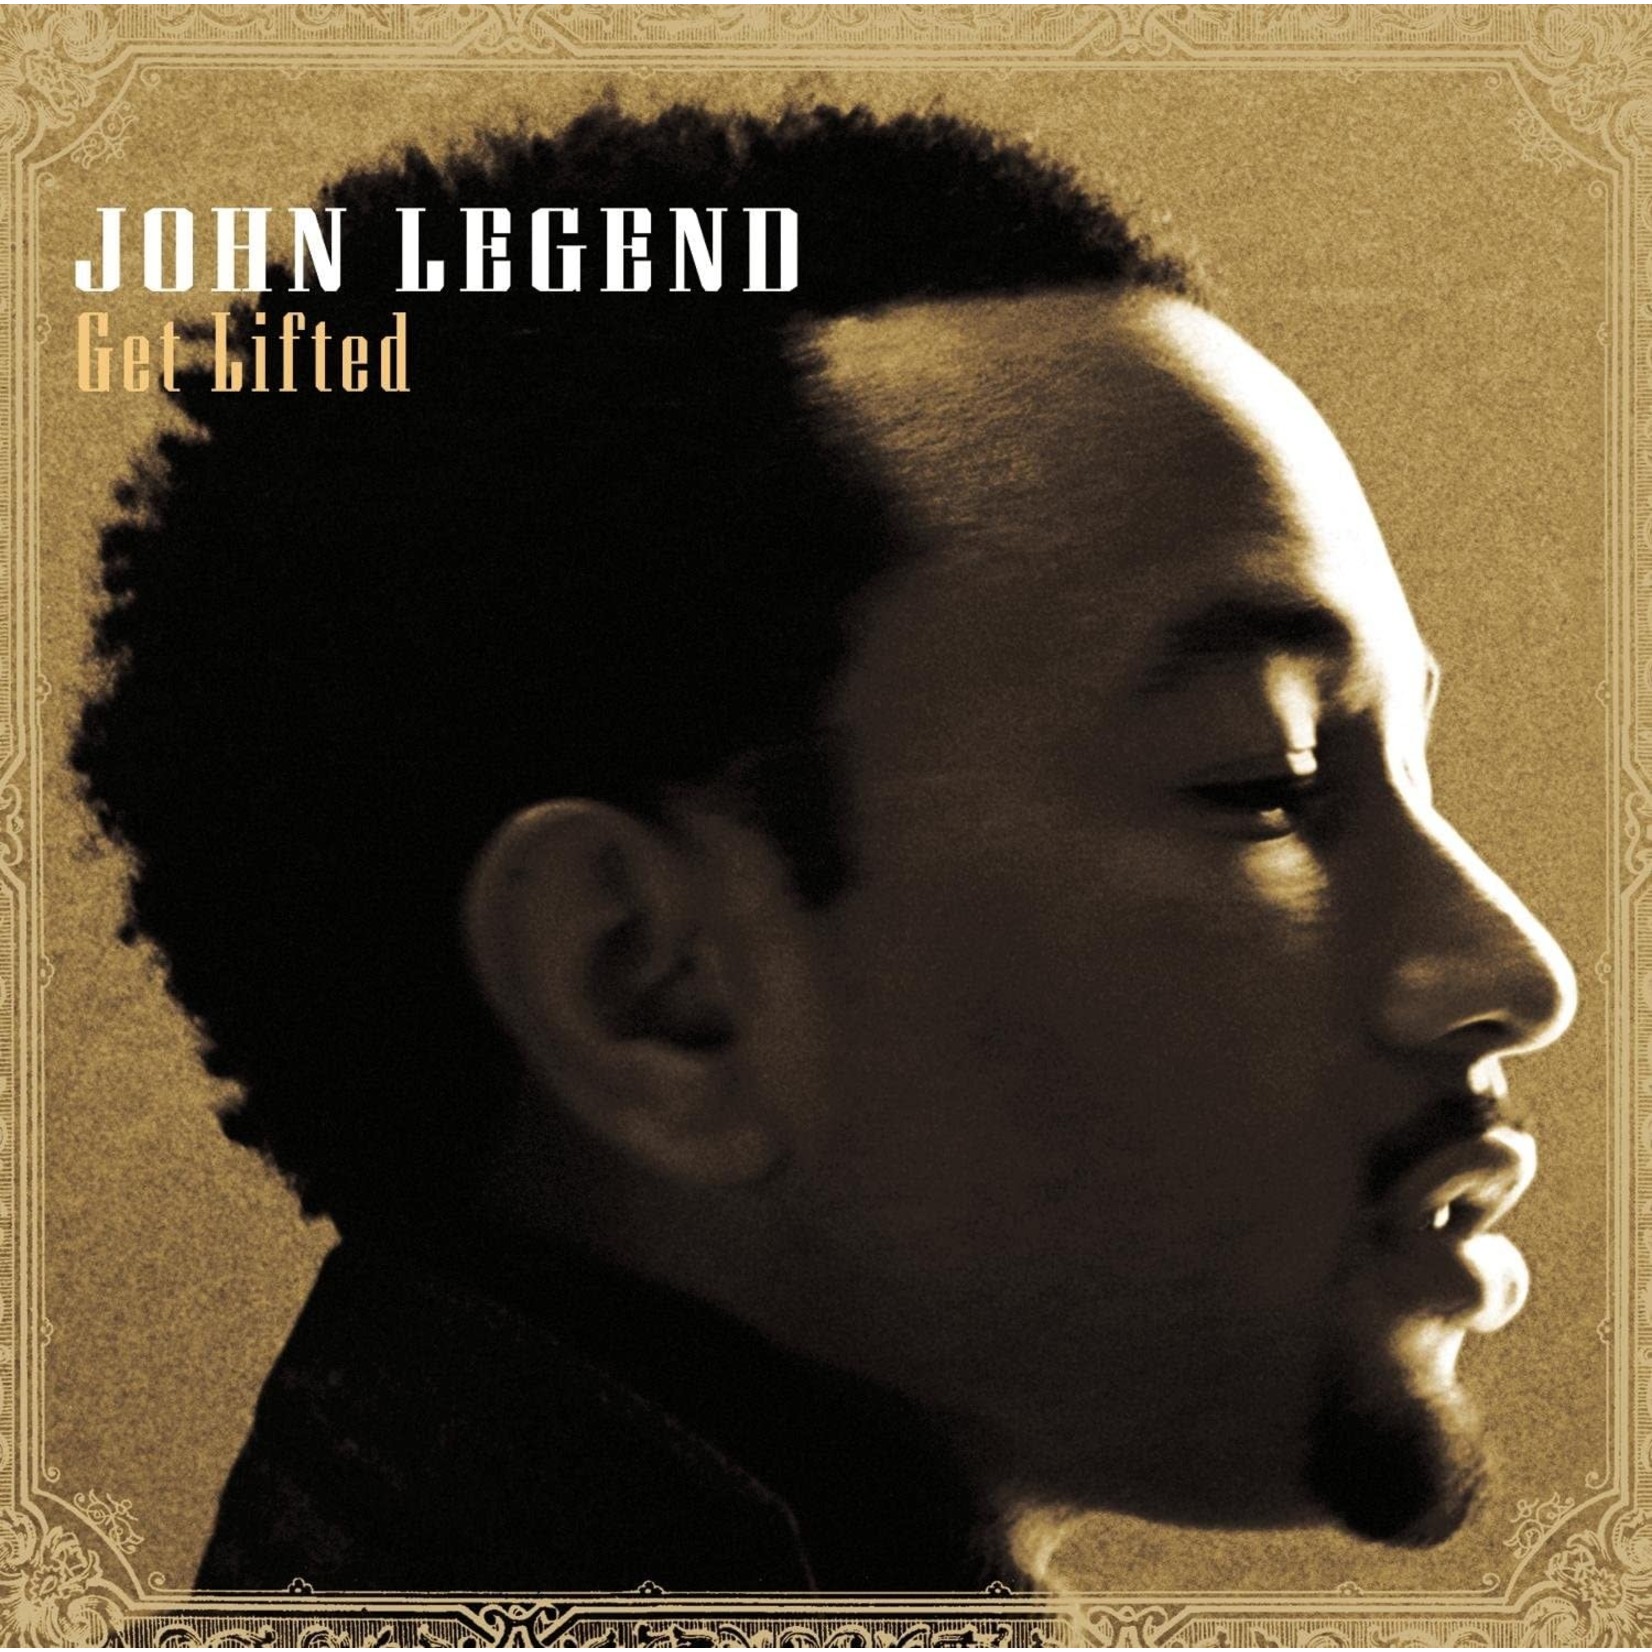 John Legend - Get Lifted [USED CD]